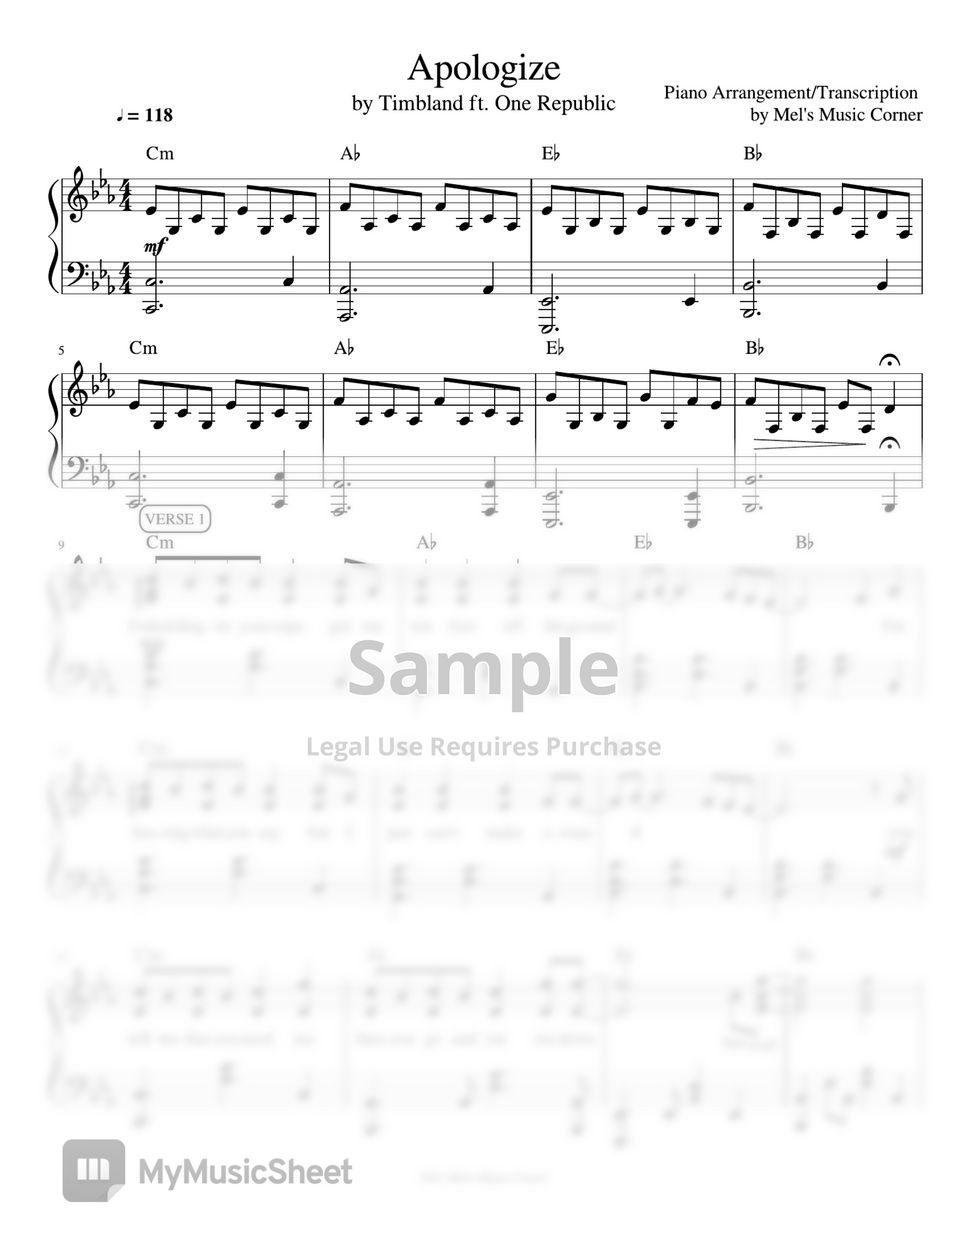 Timabland feat. One Republic - Apologize (piano sheet music) by Mel's Music Corner